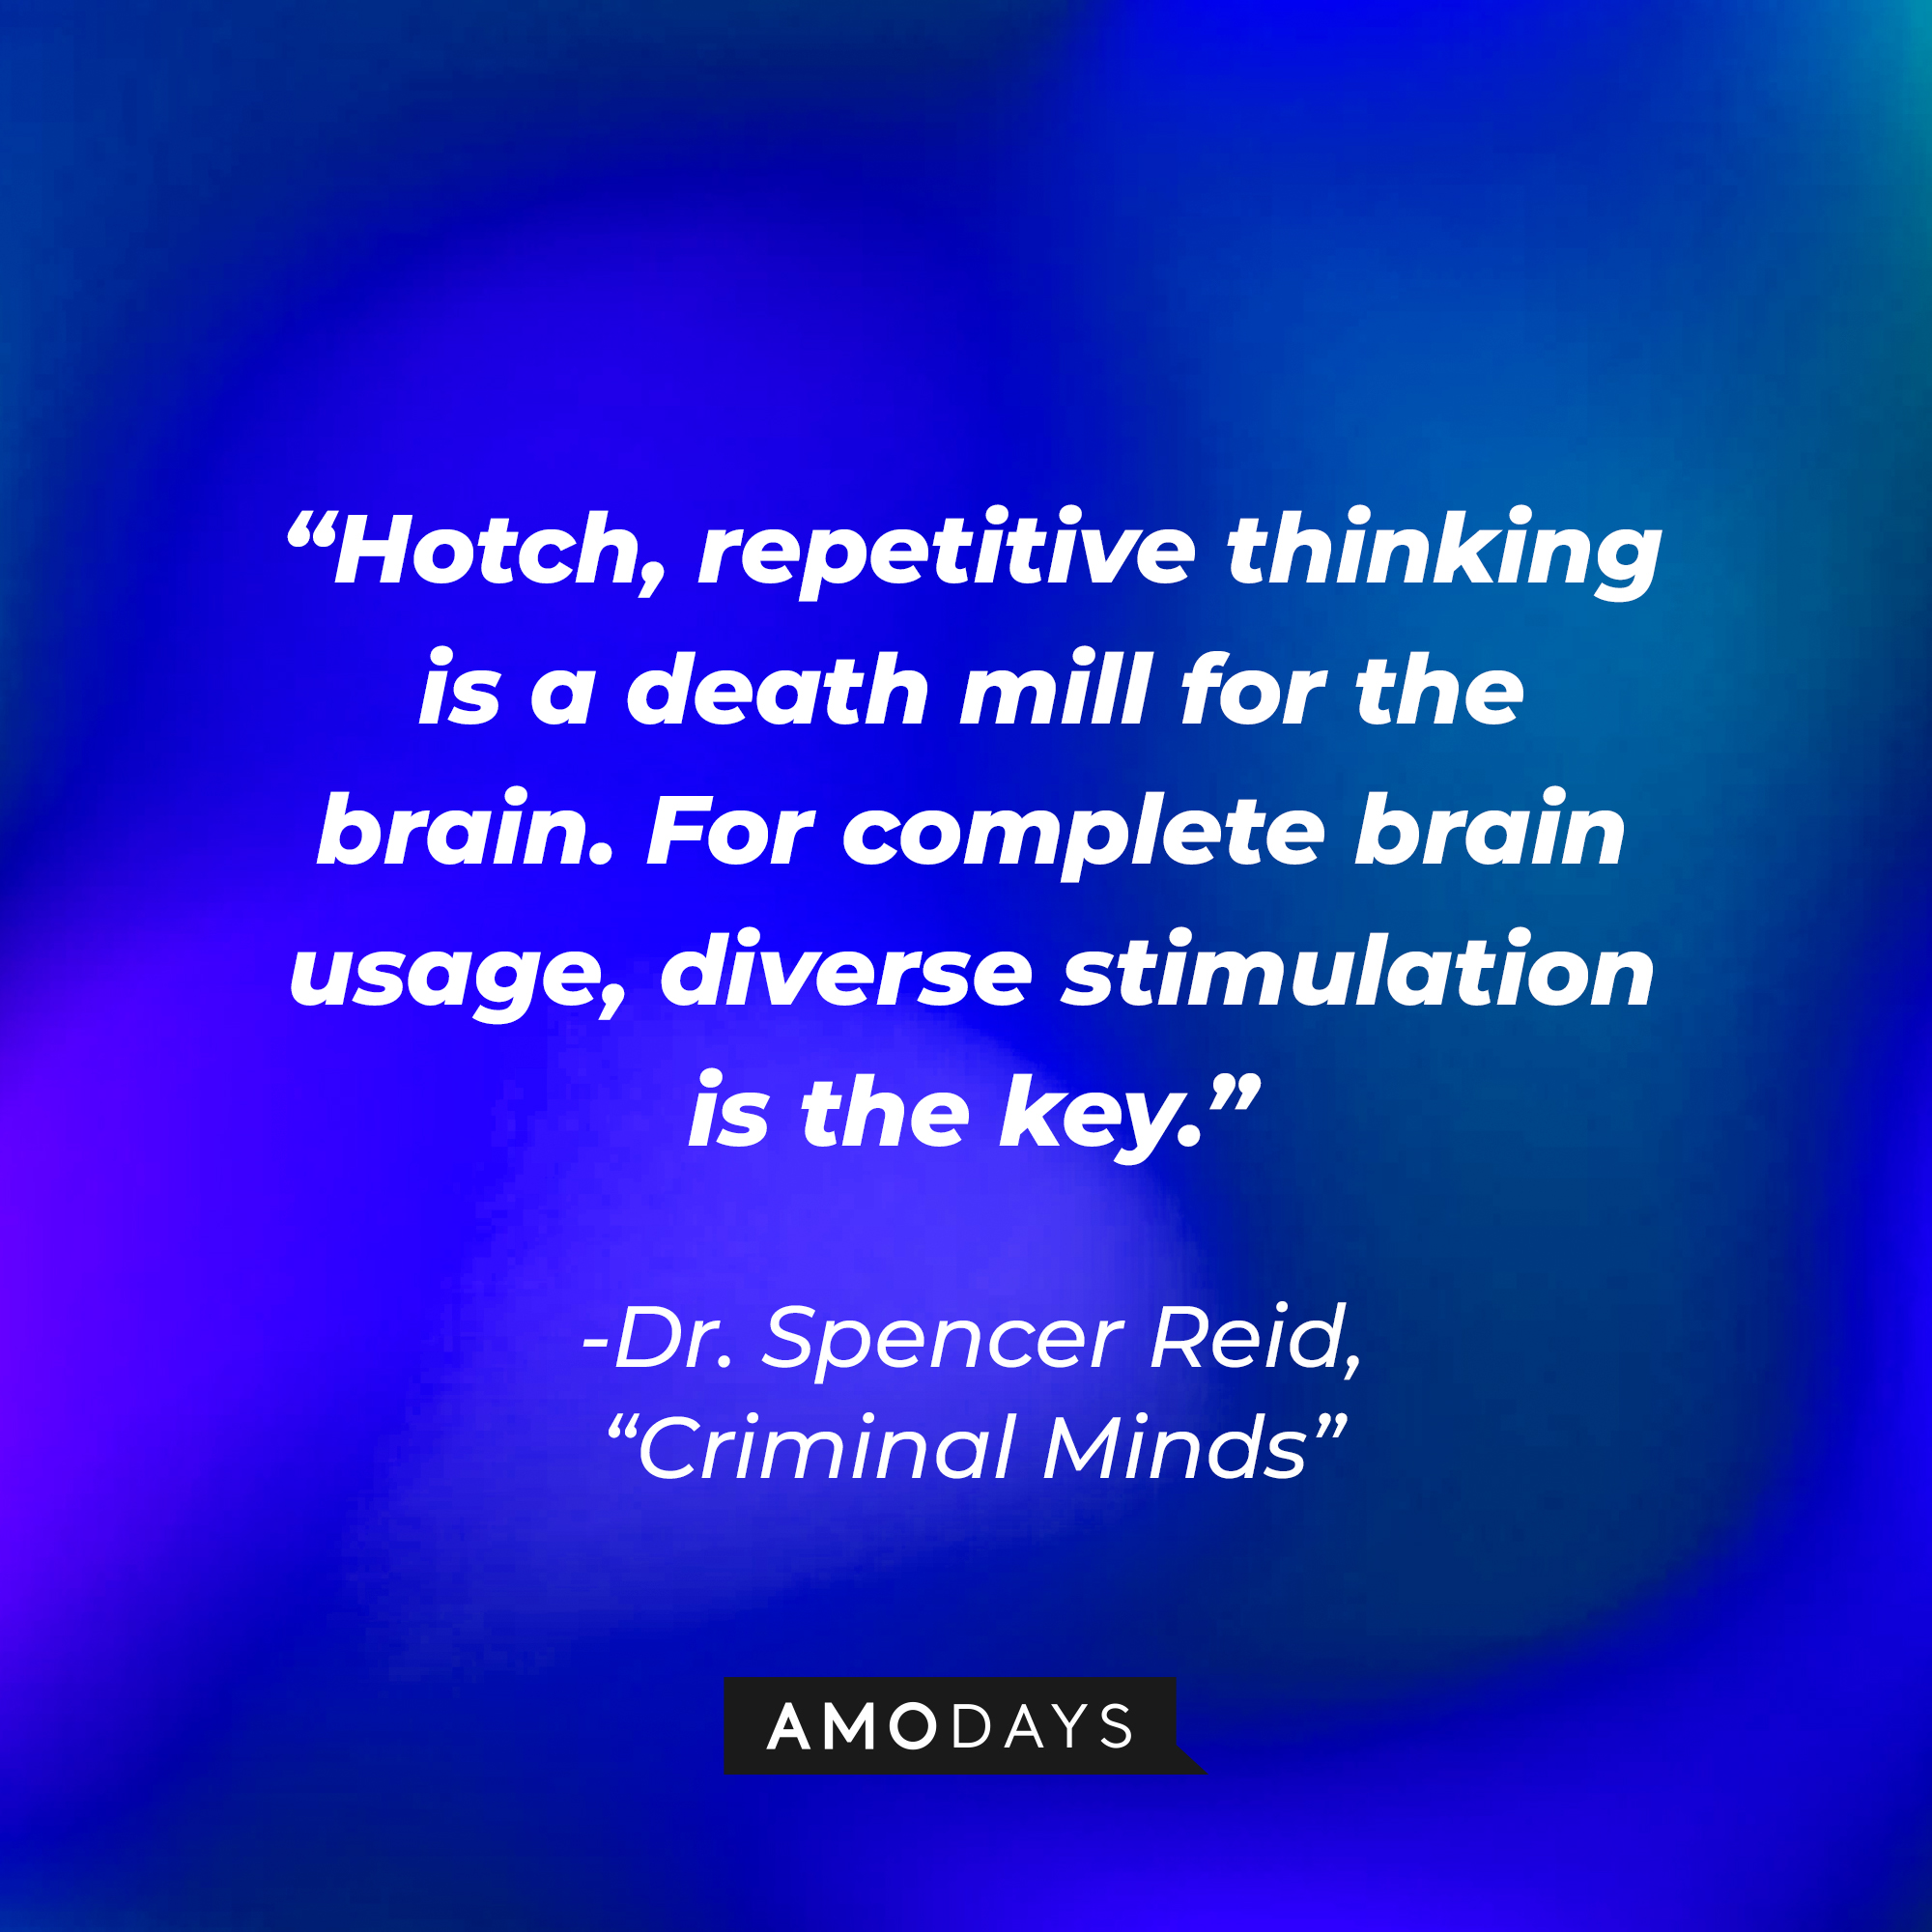 Dr. Spencer Reid's quote: Hotch, repetitive thinking is a death mill for the brain. For complete brain usage, diverse stimulation is the key.” | Source: Amodays